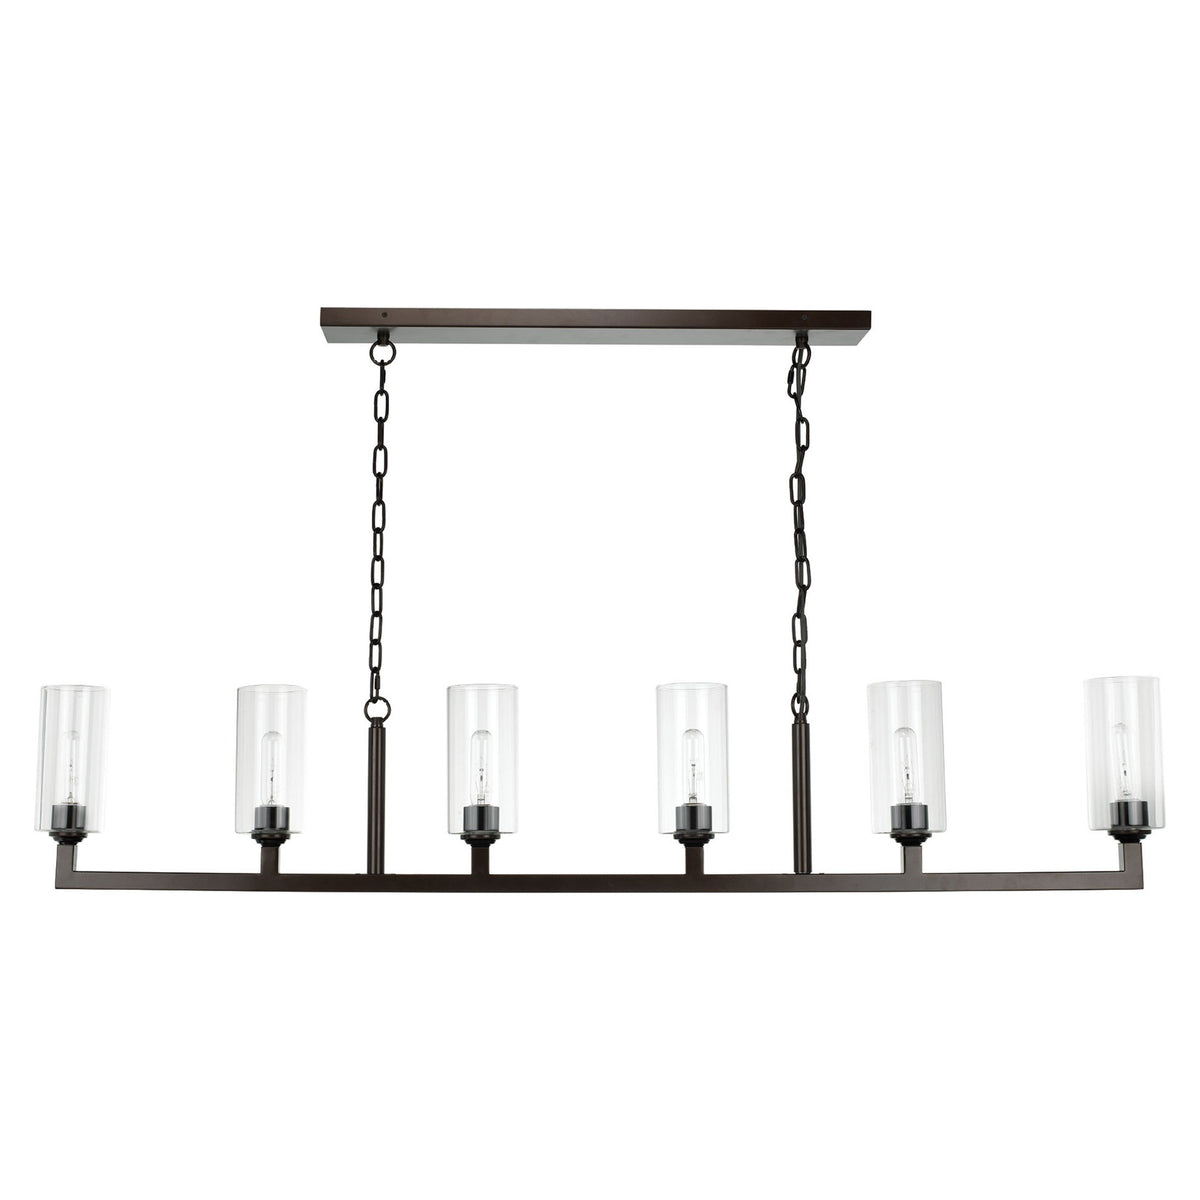 Jamie Young Company - 5LINE6-OBCL - Linear 6 Light Chandelier - Linear - Oil Rubbed Bronze